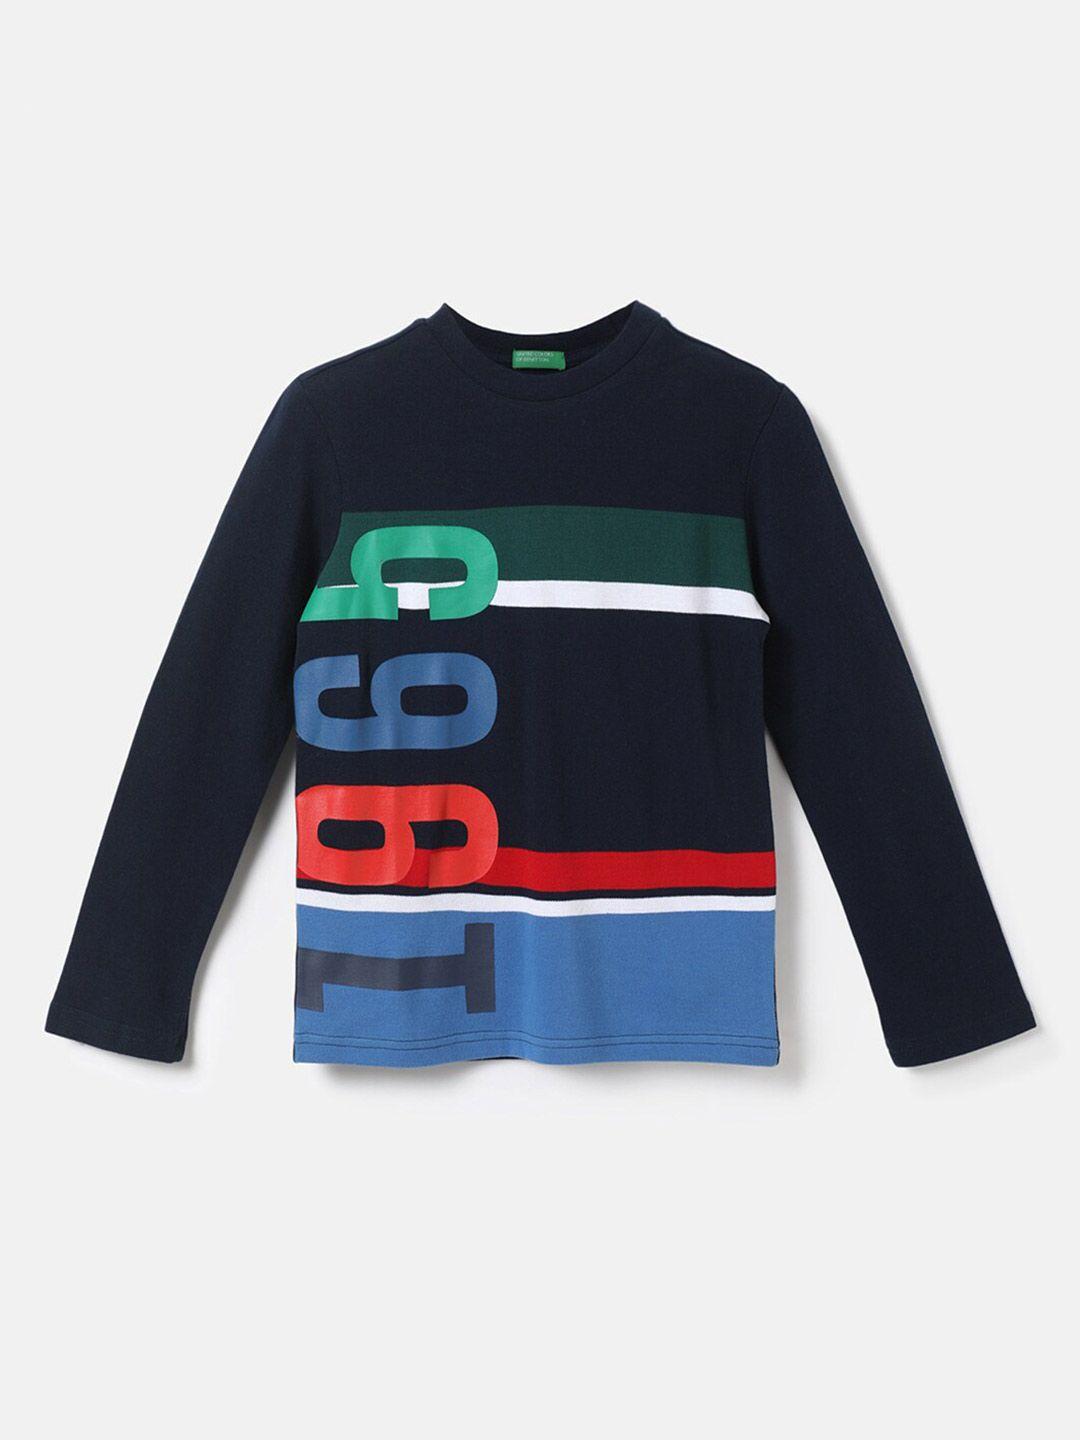 United Colors of Benetton Boys Navy Blue Printed T-shirt